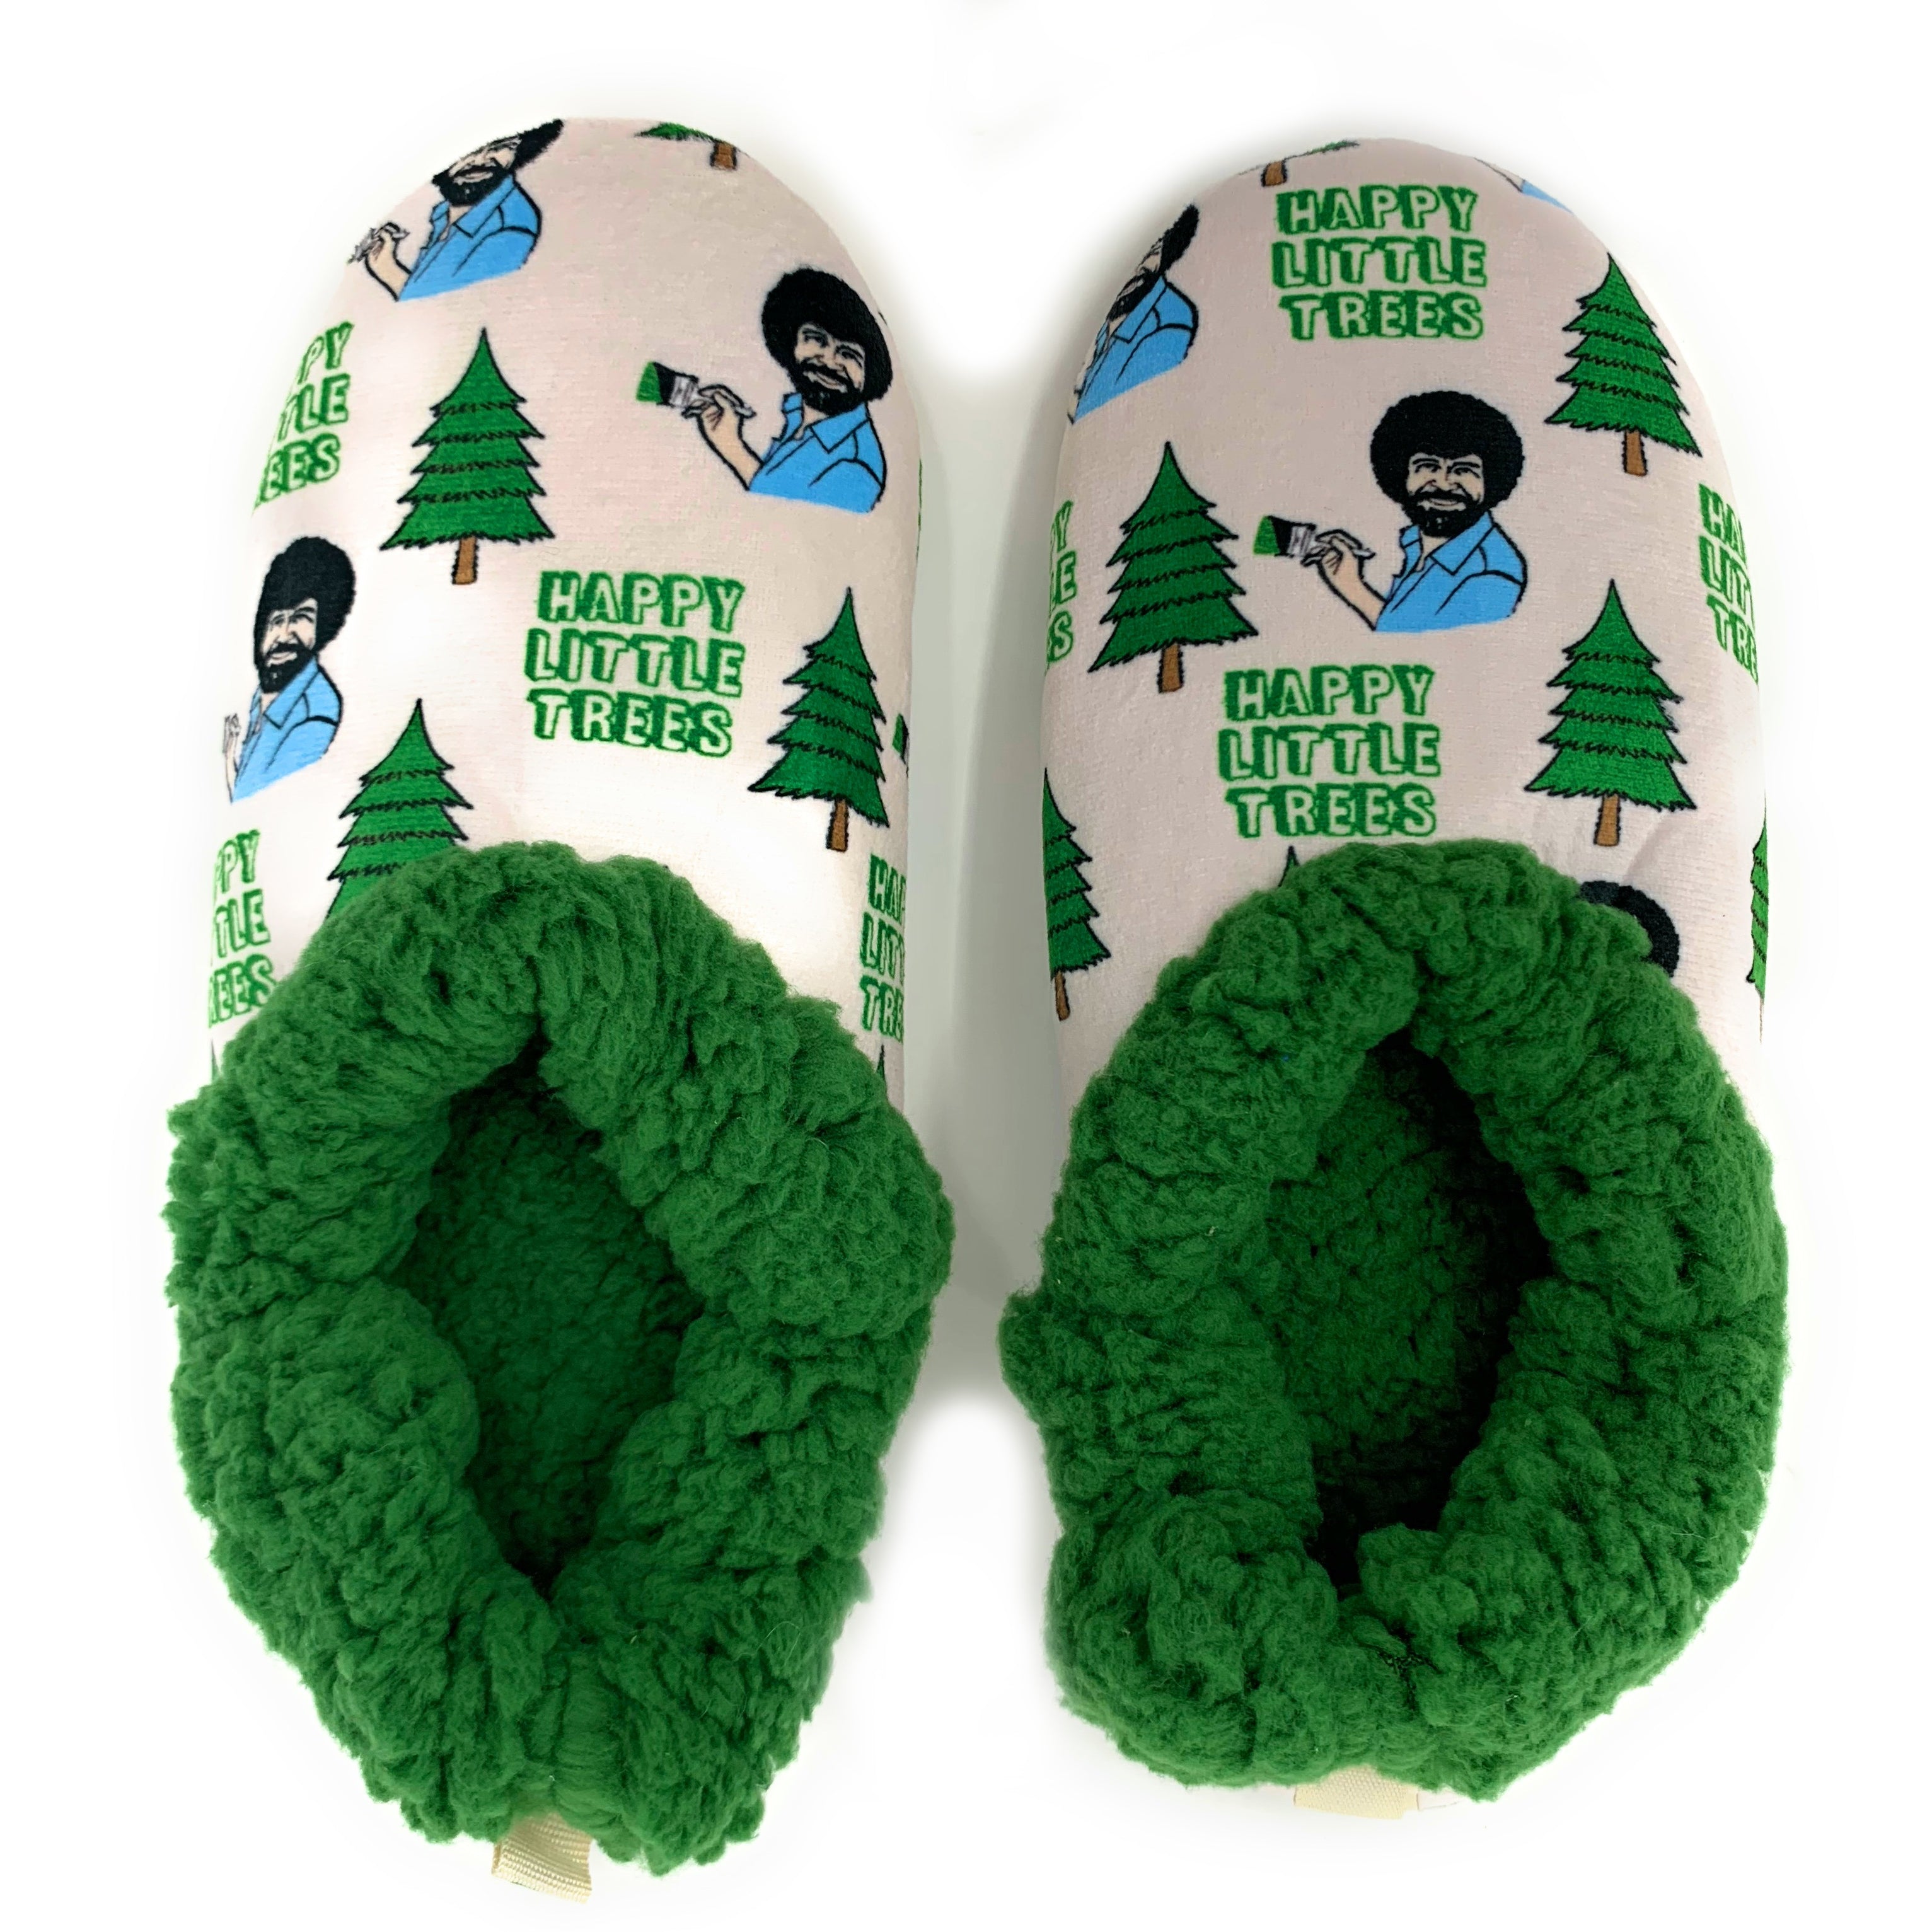 Lil Happy Trees Slippers for Women